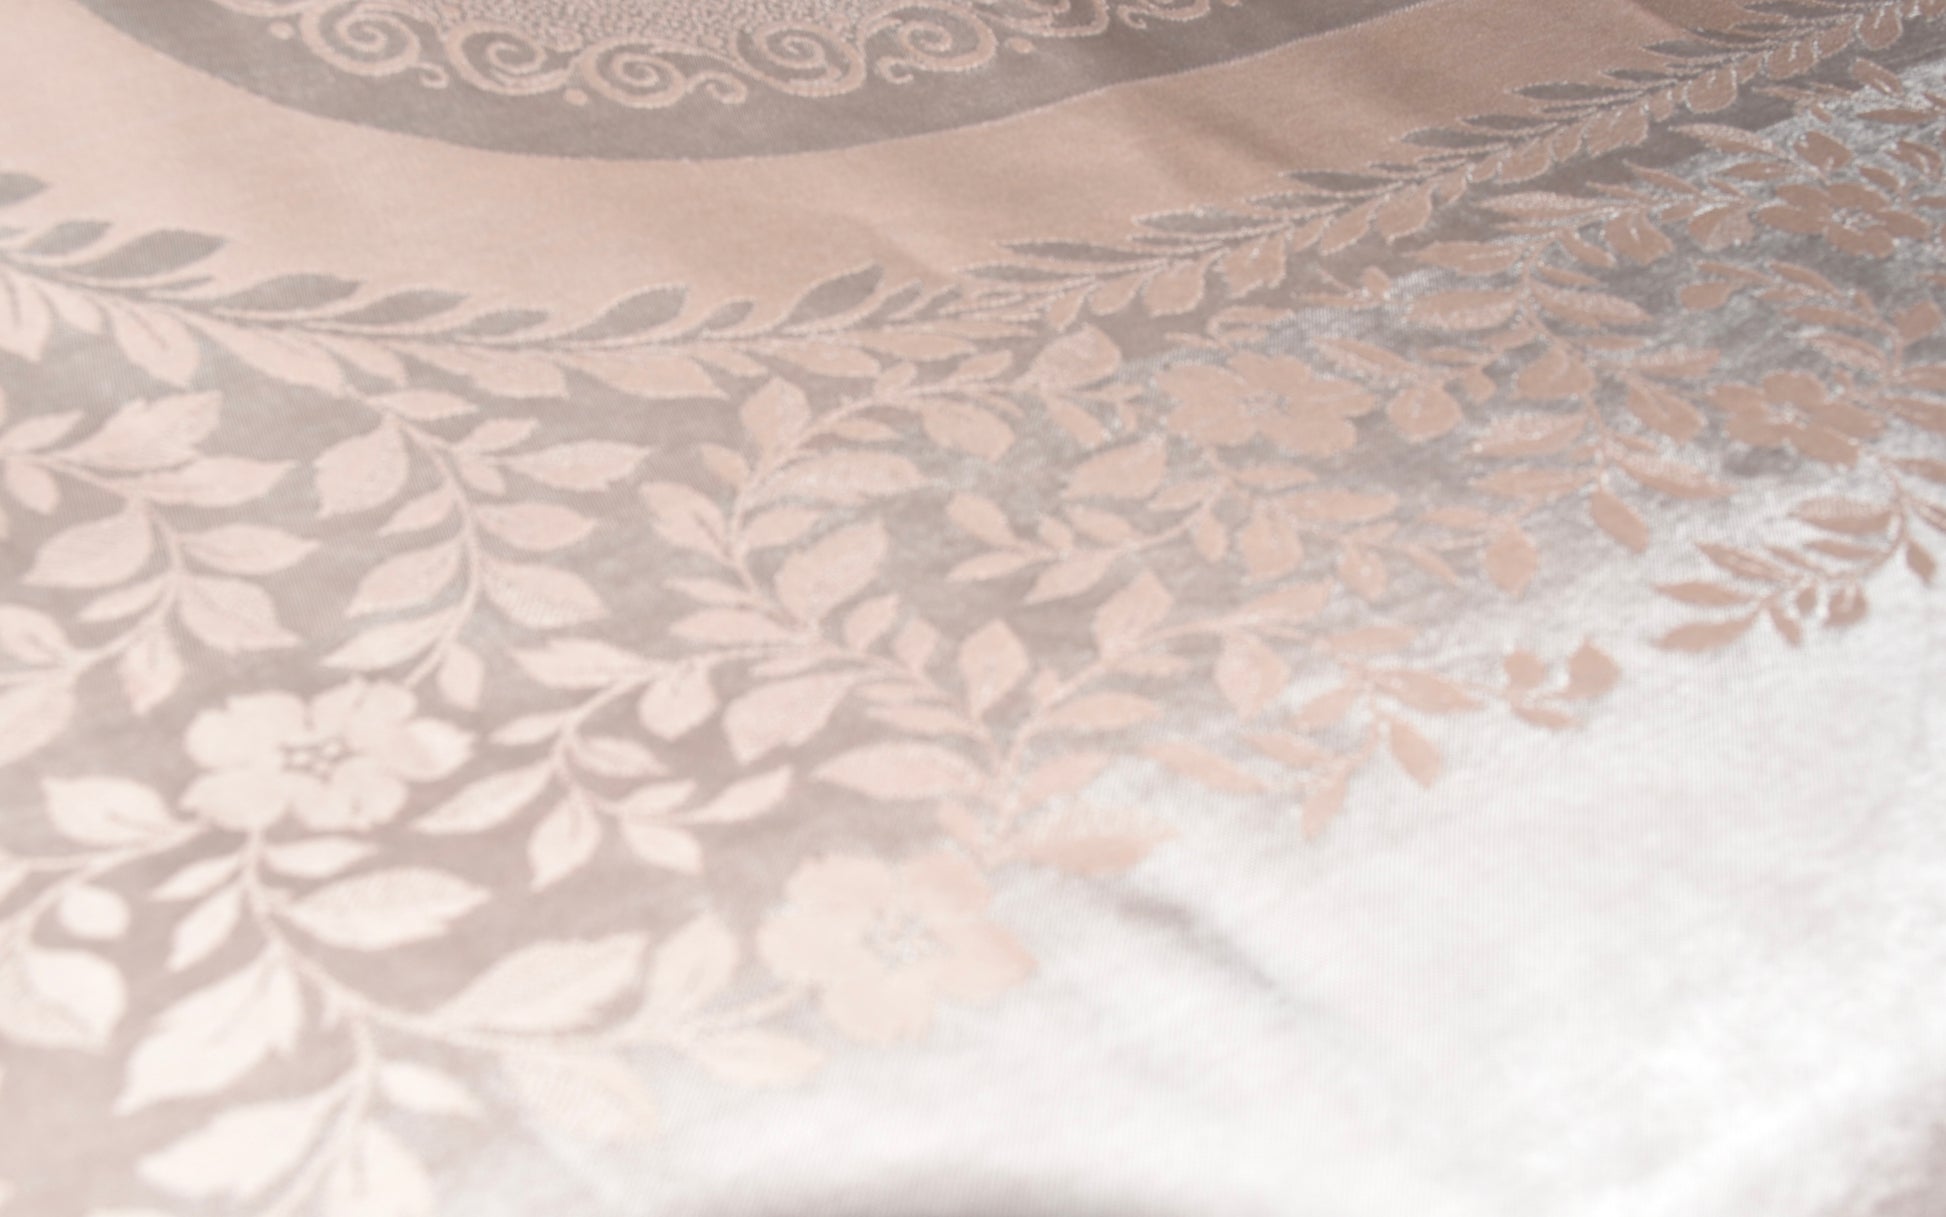 Original Irish Damask  Size: L208cm x W164cm Colour: Pink Peach Blush Mille Fleurs Roll Hemmed Cotton & Damask made in Ireland No R8 - Pattern Number 3 Condition: Very Good, As New, Never Used